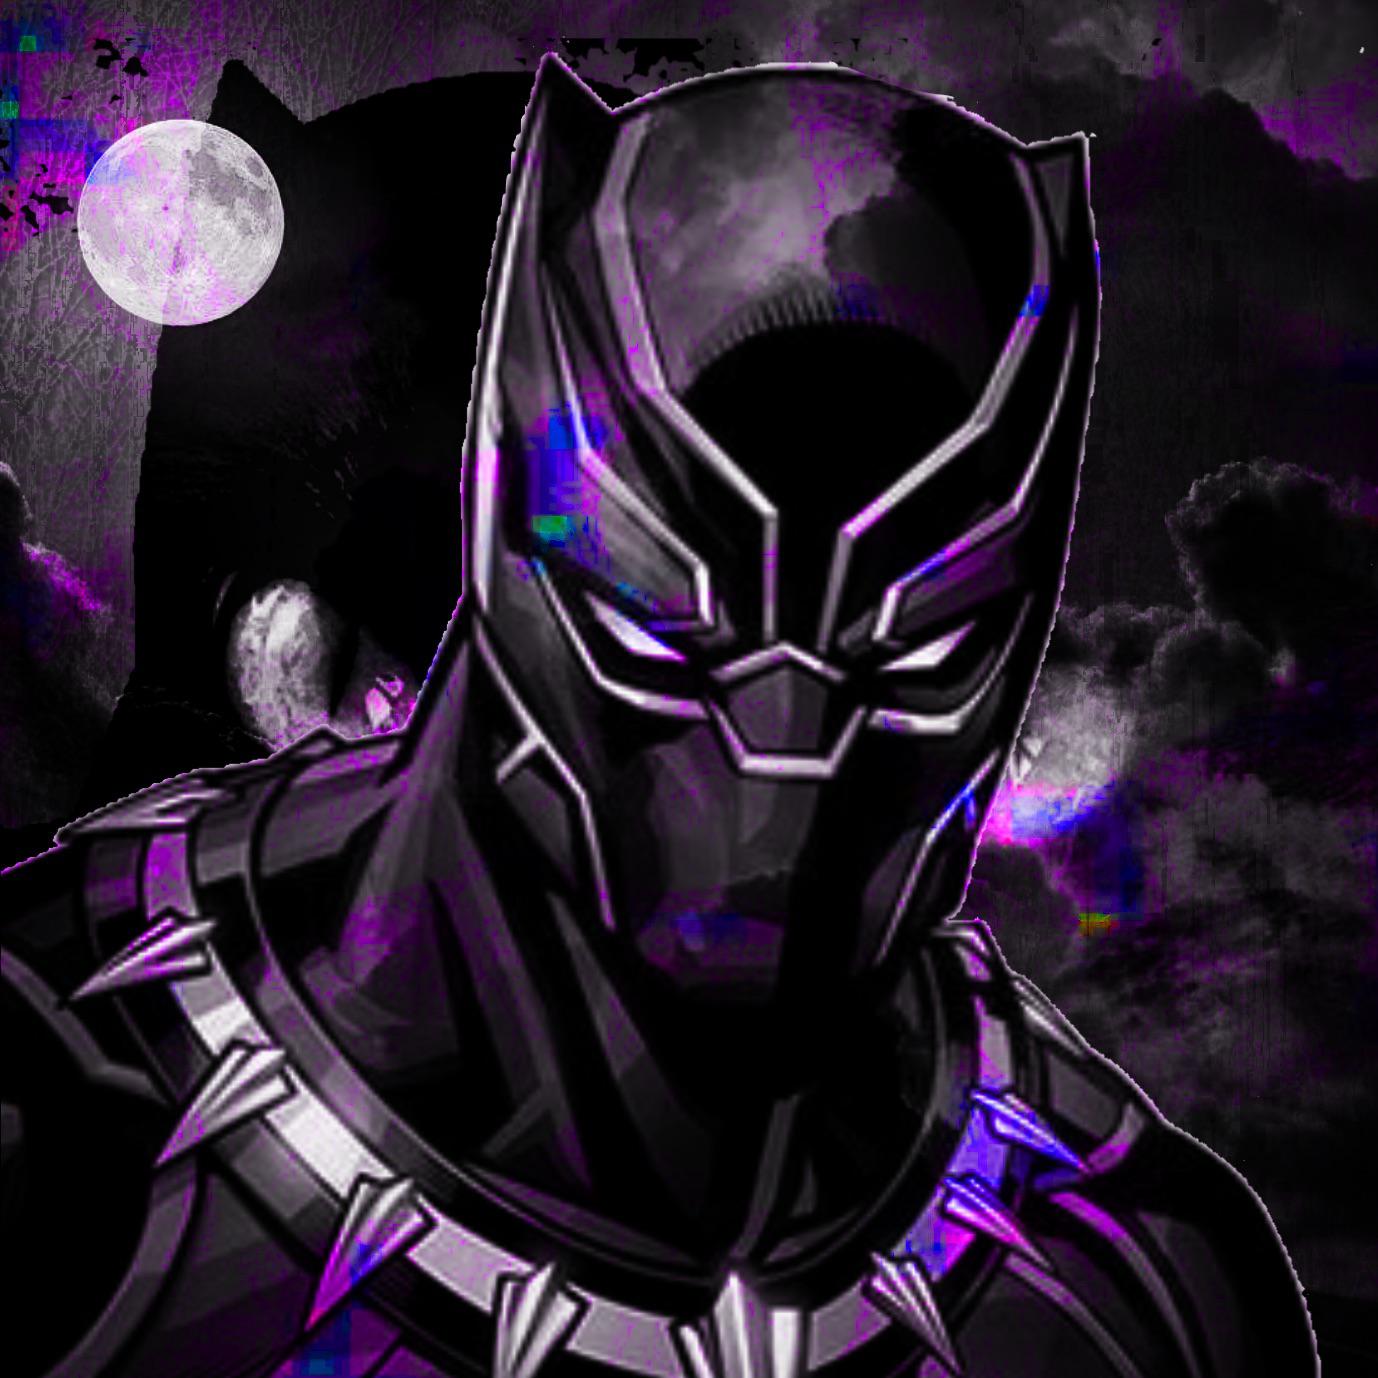  Black Panther Hintergrundbild 1378x1378. Made an aesthetic edit of T'Challa because yes